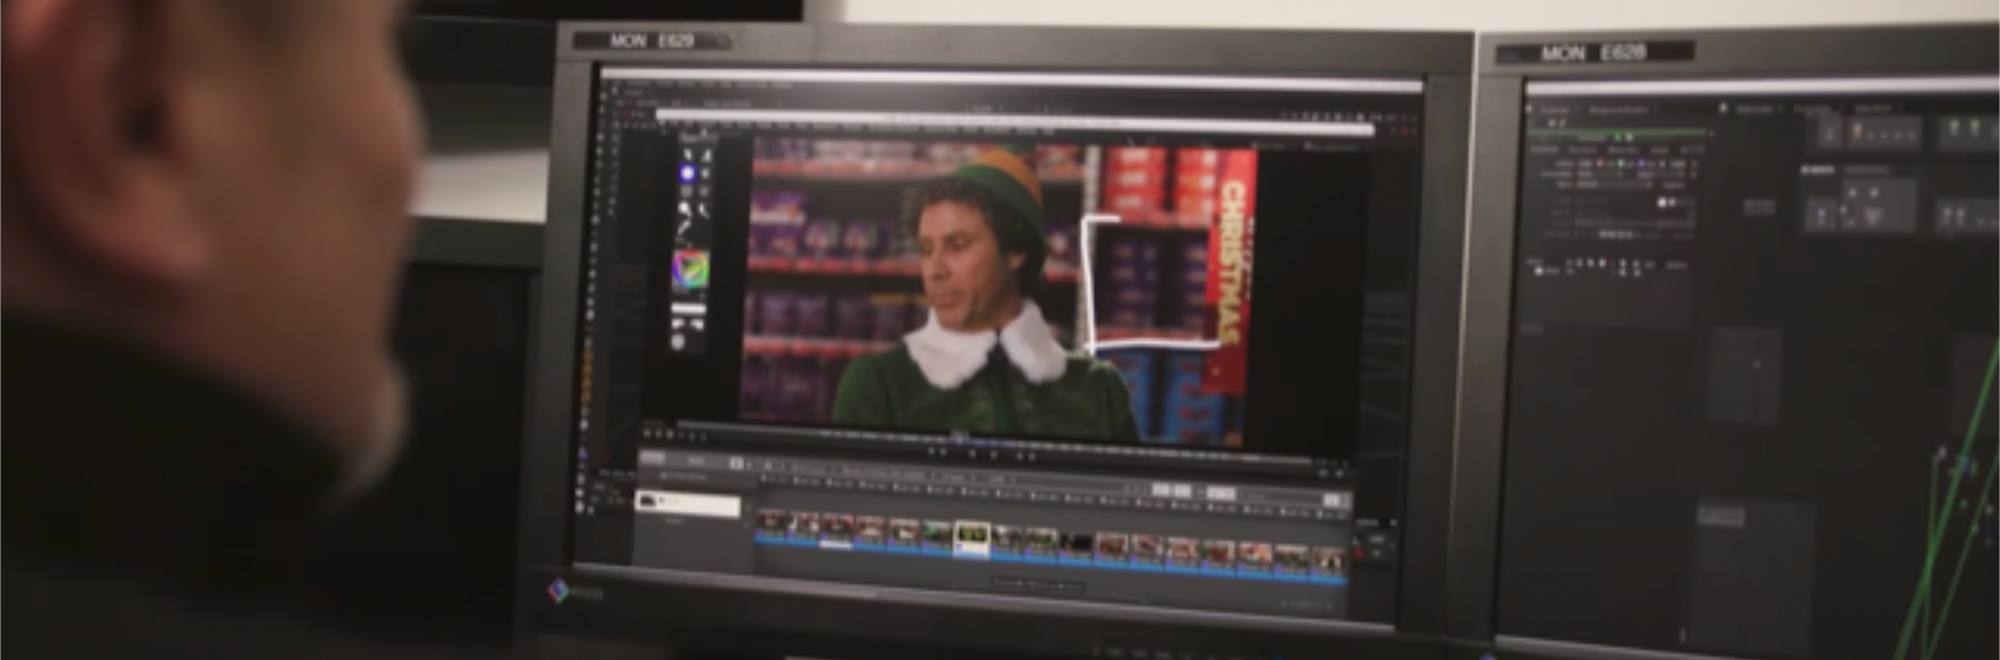 How Asda brought Buddy The Elf back to screens this Christmas